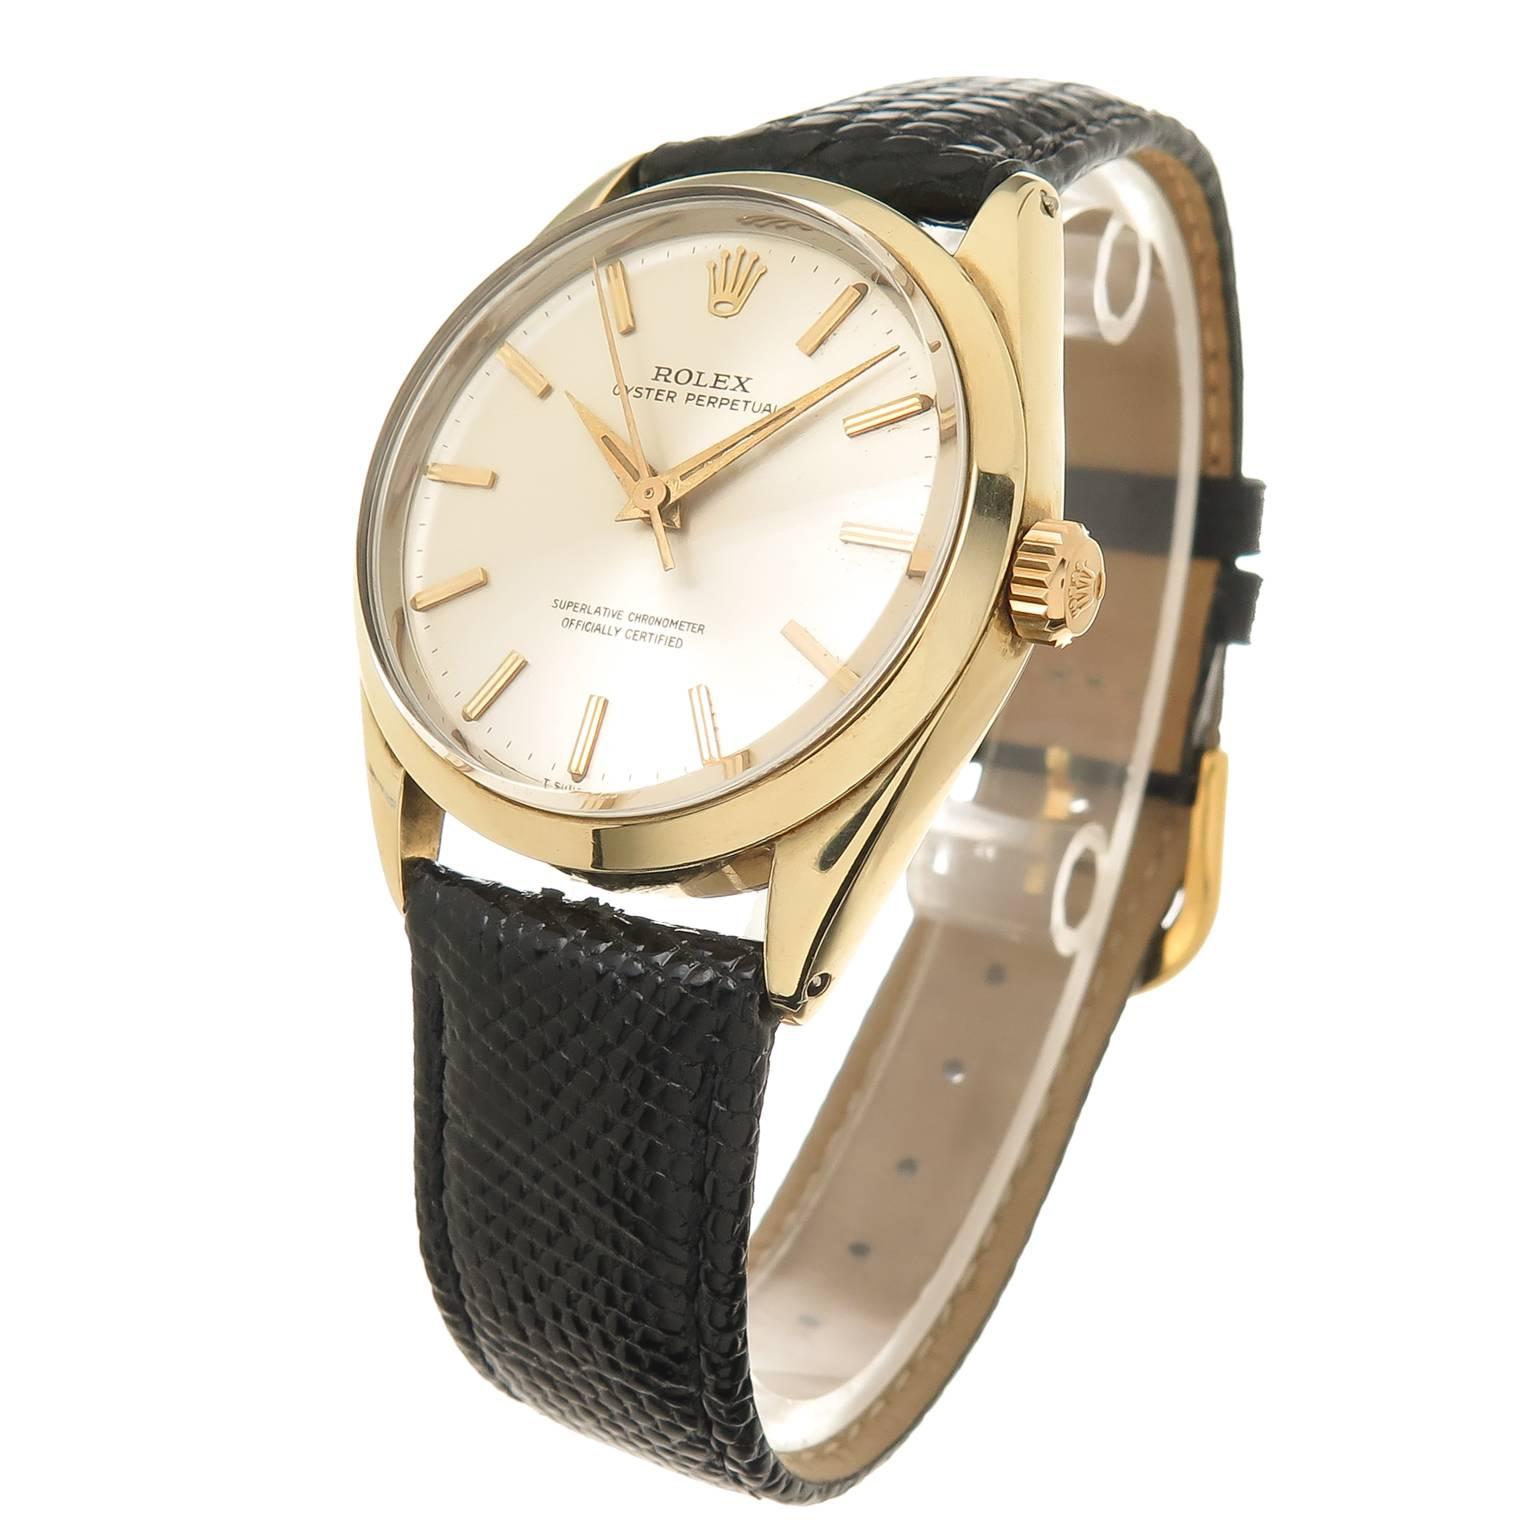 Circa 1953 Rolex Reference 1024, 34 MM Gold Shell with stainless steel back waterproof case.  Automatic, self winding Perpetual Movement. Silvered Dial with Raised Gold Markers. New Hadley Roma Black Lizard strap, recently serviced and comes with a